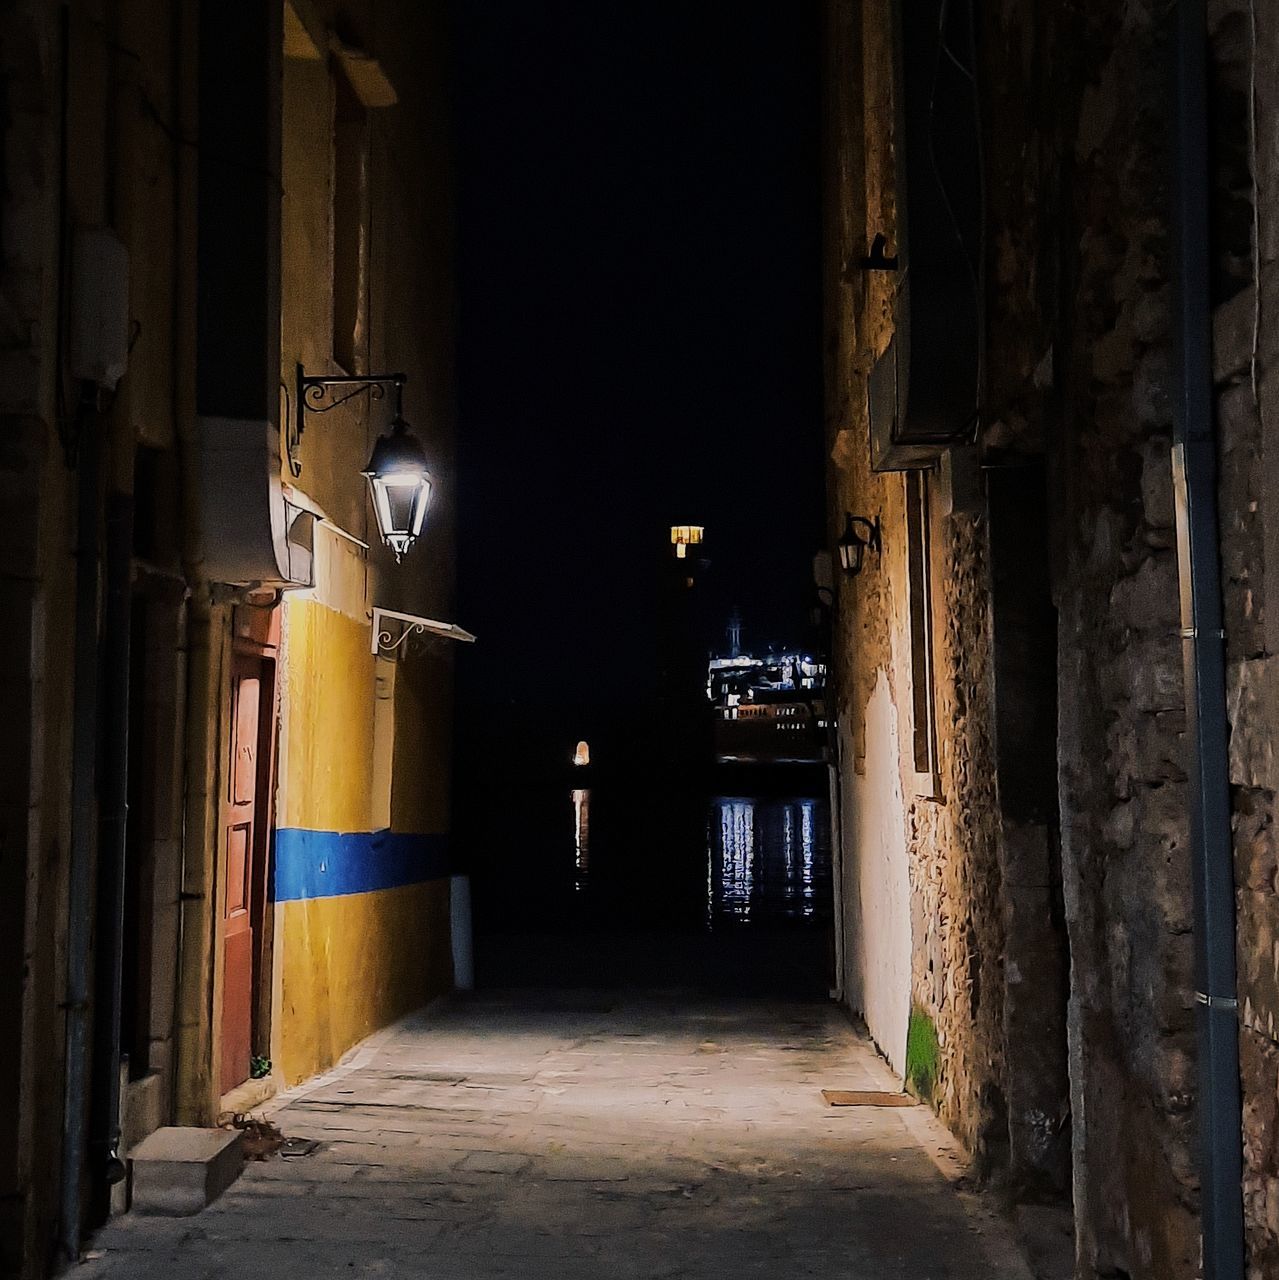 alley, architecture, road, street, darkness, urban area, night, infrastructure, built structure, building, light, no people, the way forward, building exterior, history, city, ancient history, old, the past, lighting, lighting equipment, outdoors